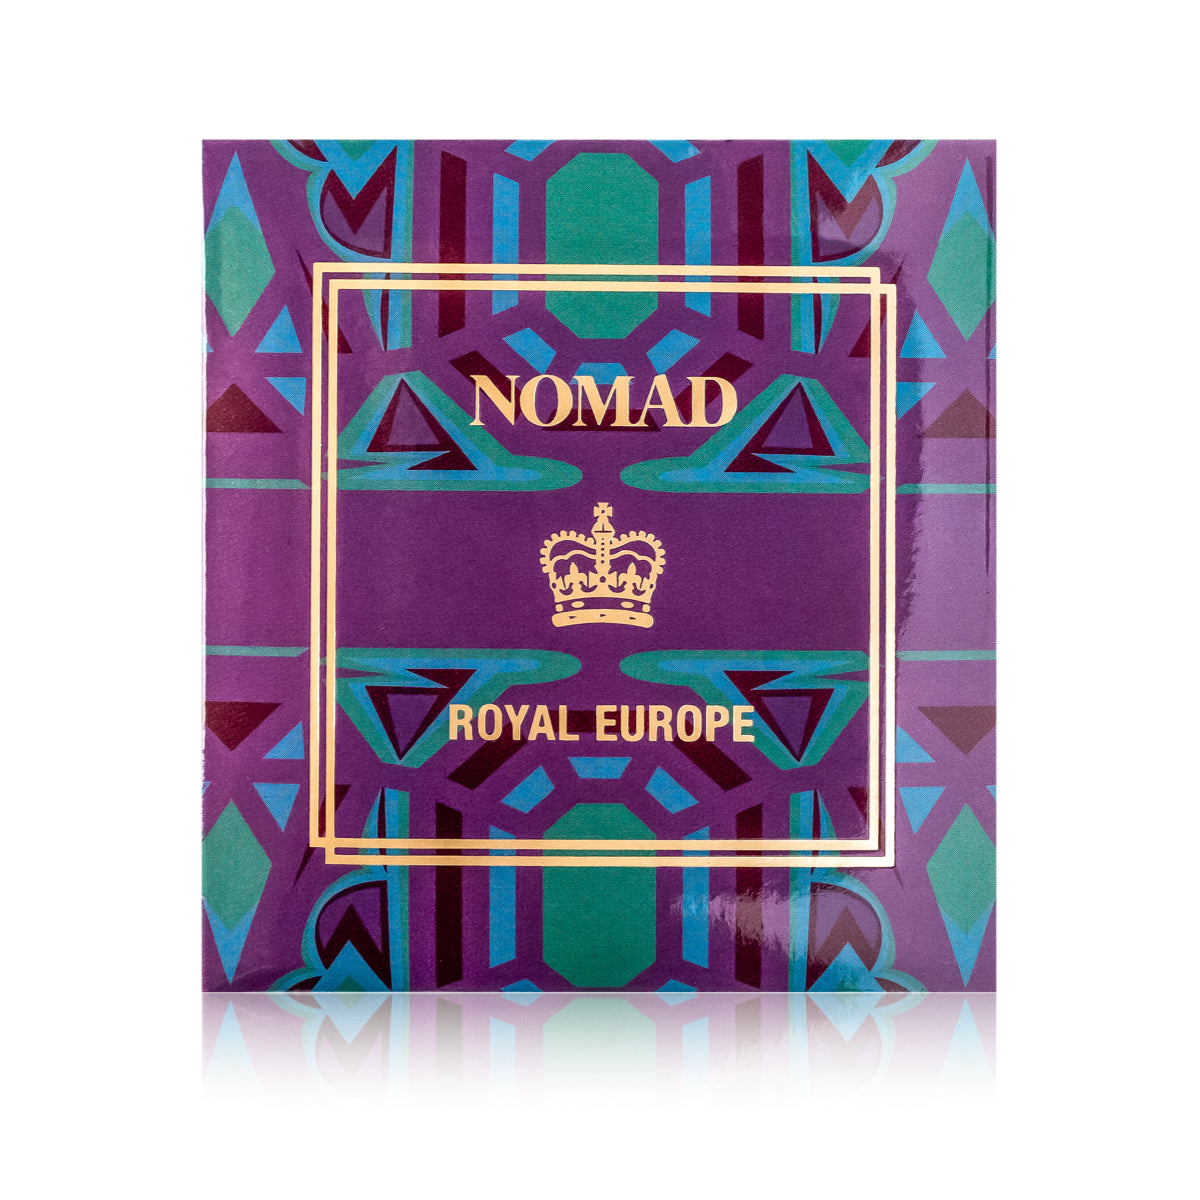 NOMAD x Royal Europe Intense Multi-Chrome Pigment in Imperial Crown